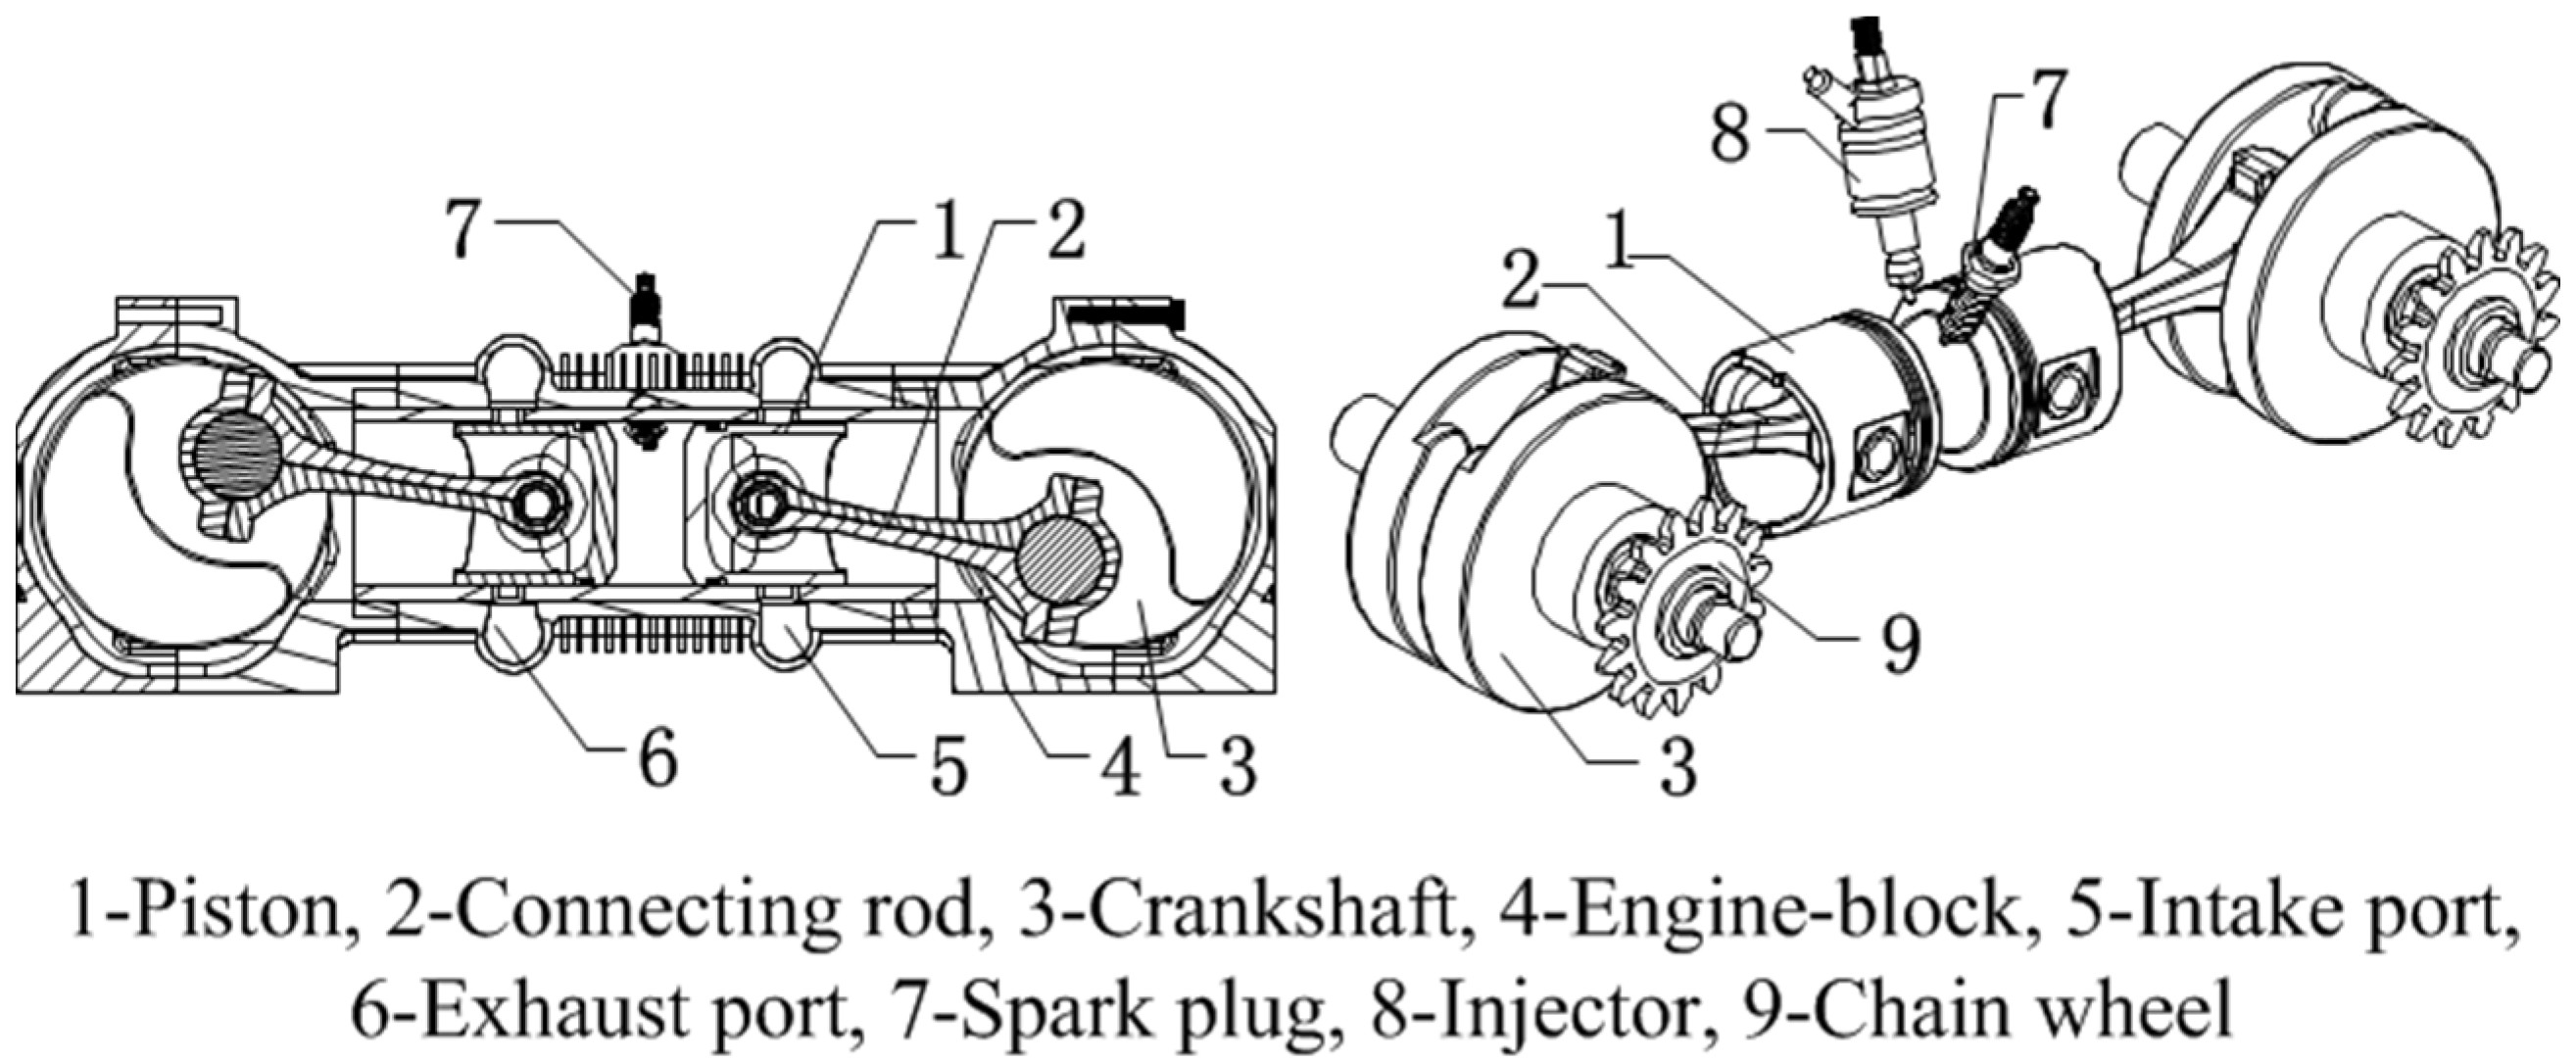 Diagram Of A Four Stroke Engine Energies Free Full Text Of Diagram Of A Four Stroke Engine